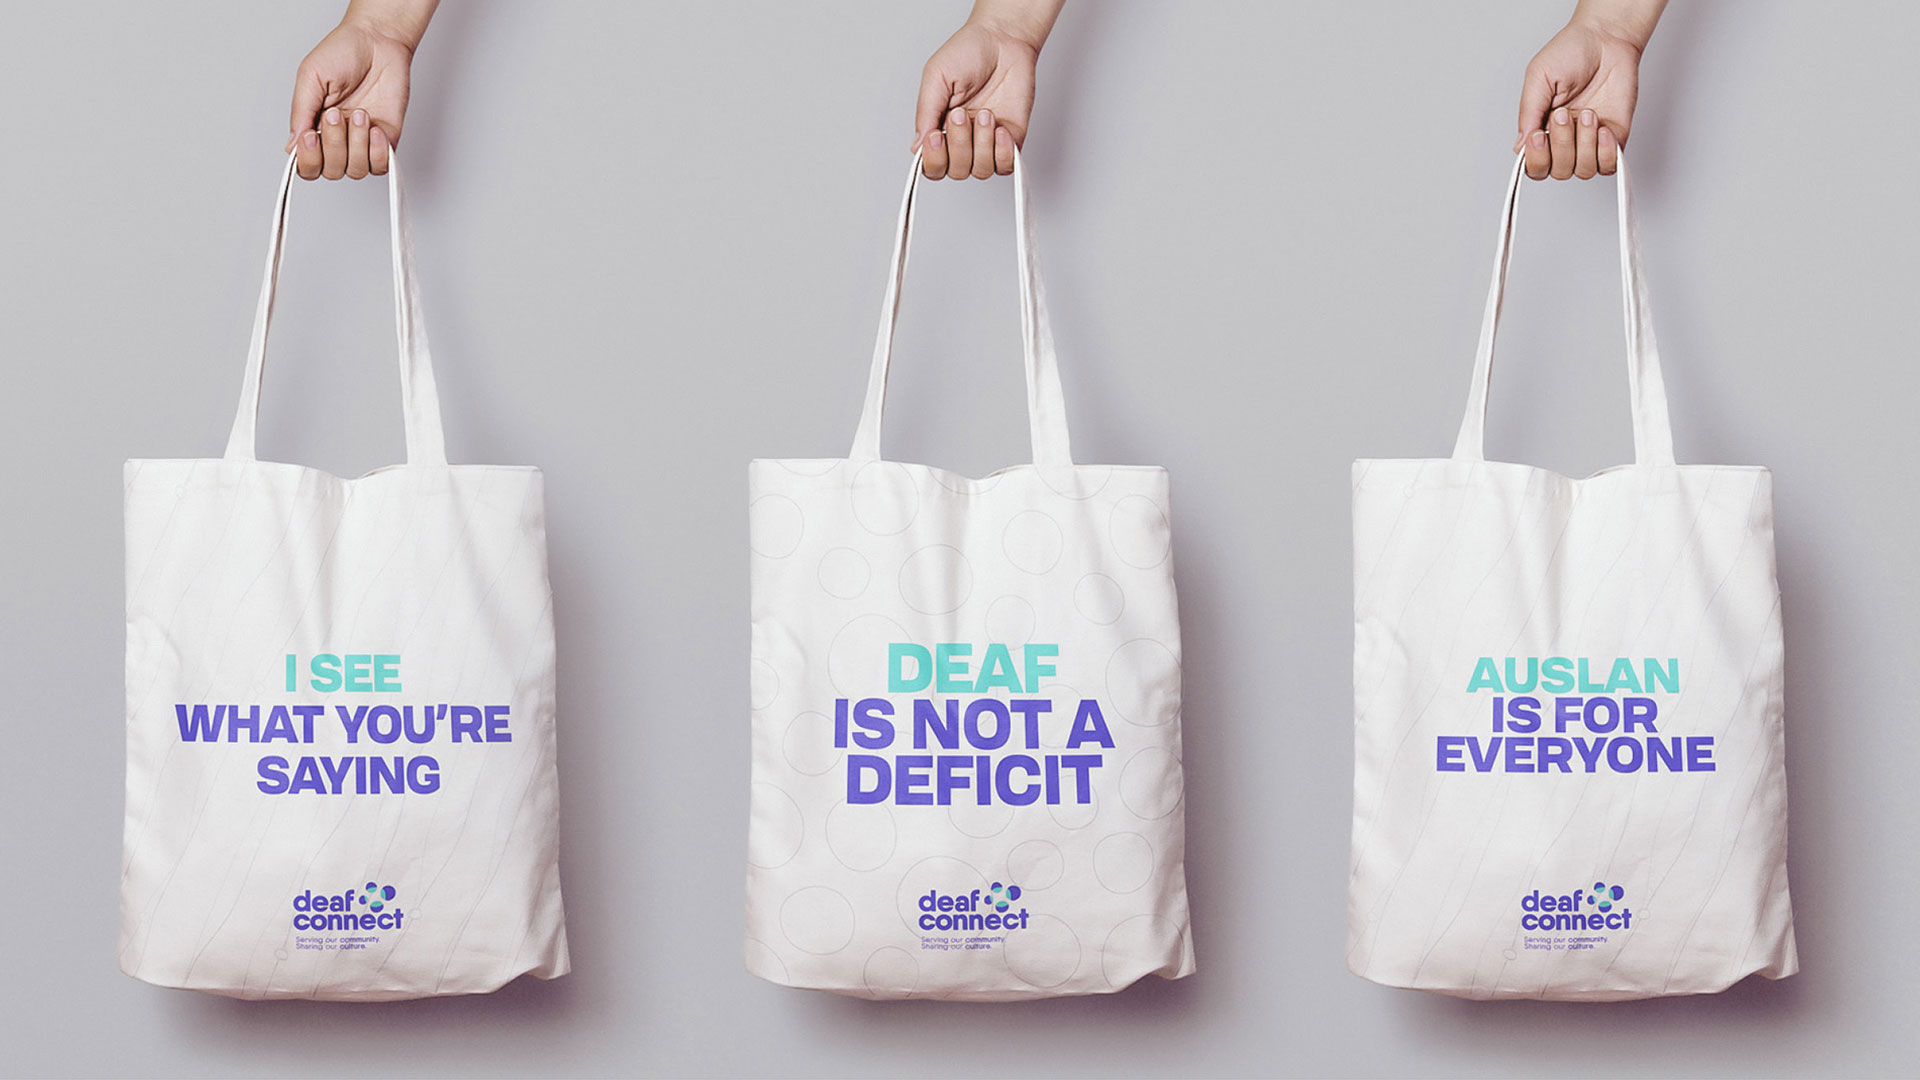 Three tote bags that say "I see what you're saying", "Deaf is not a deficit" "Auslan is for everyone"